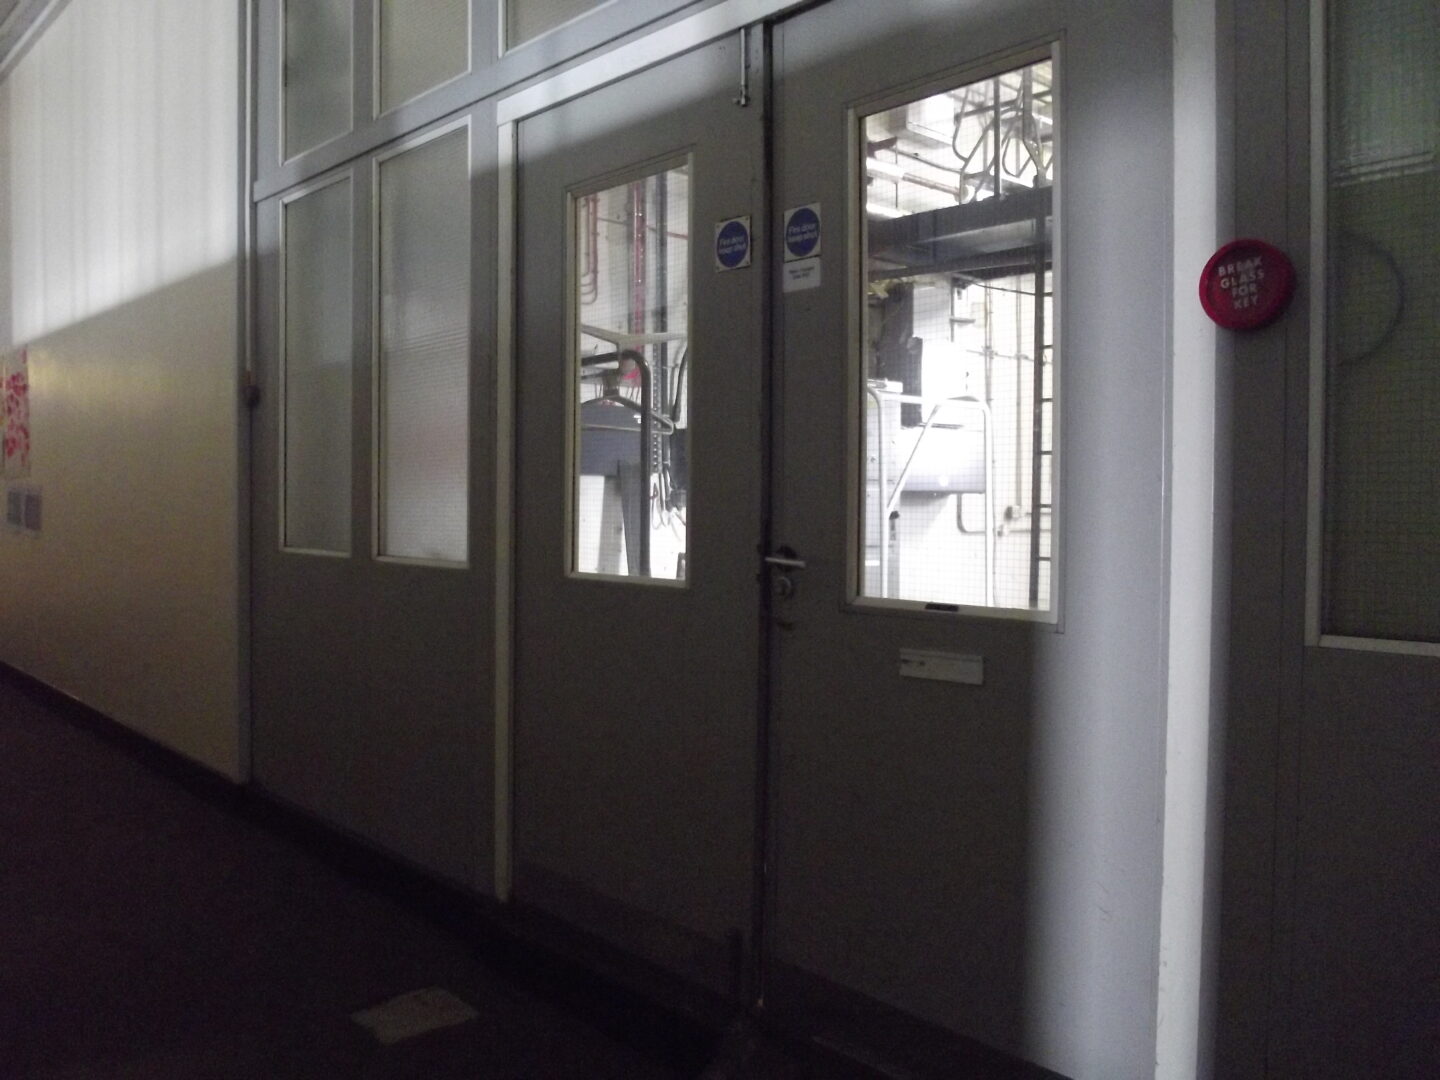 Entrance/partitions to W401 plant room, 24 Sep 2011